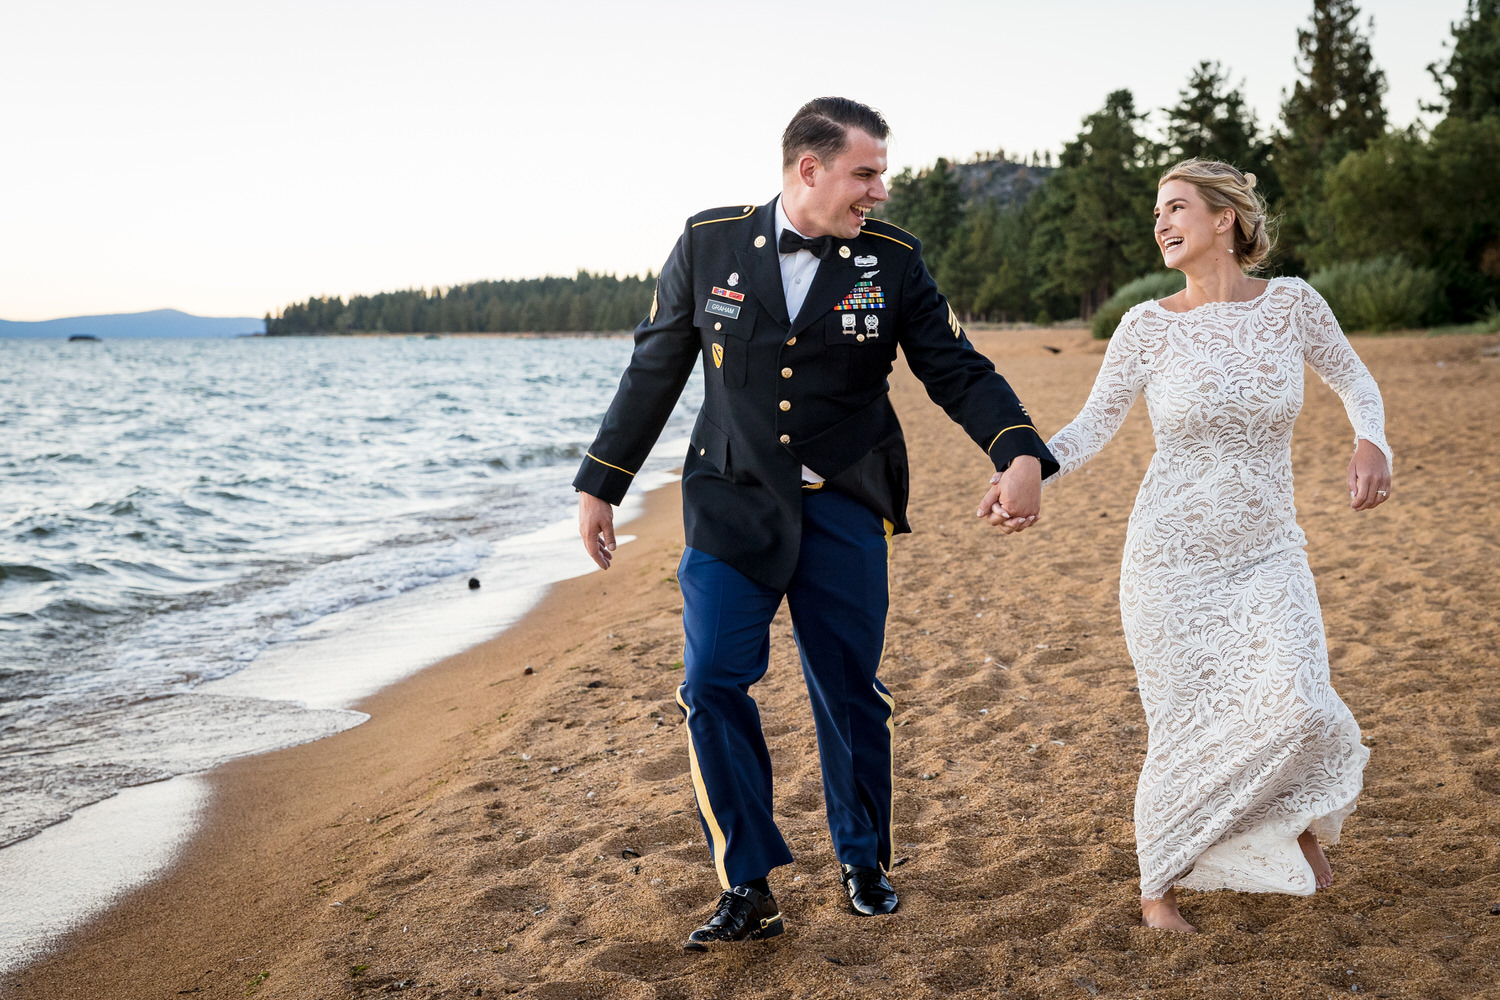 A joyous, candid portrait of a bride and groom walking on the beach in South Lake Tahoe.